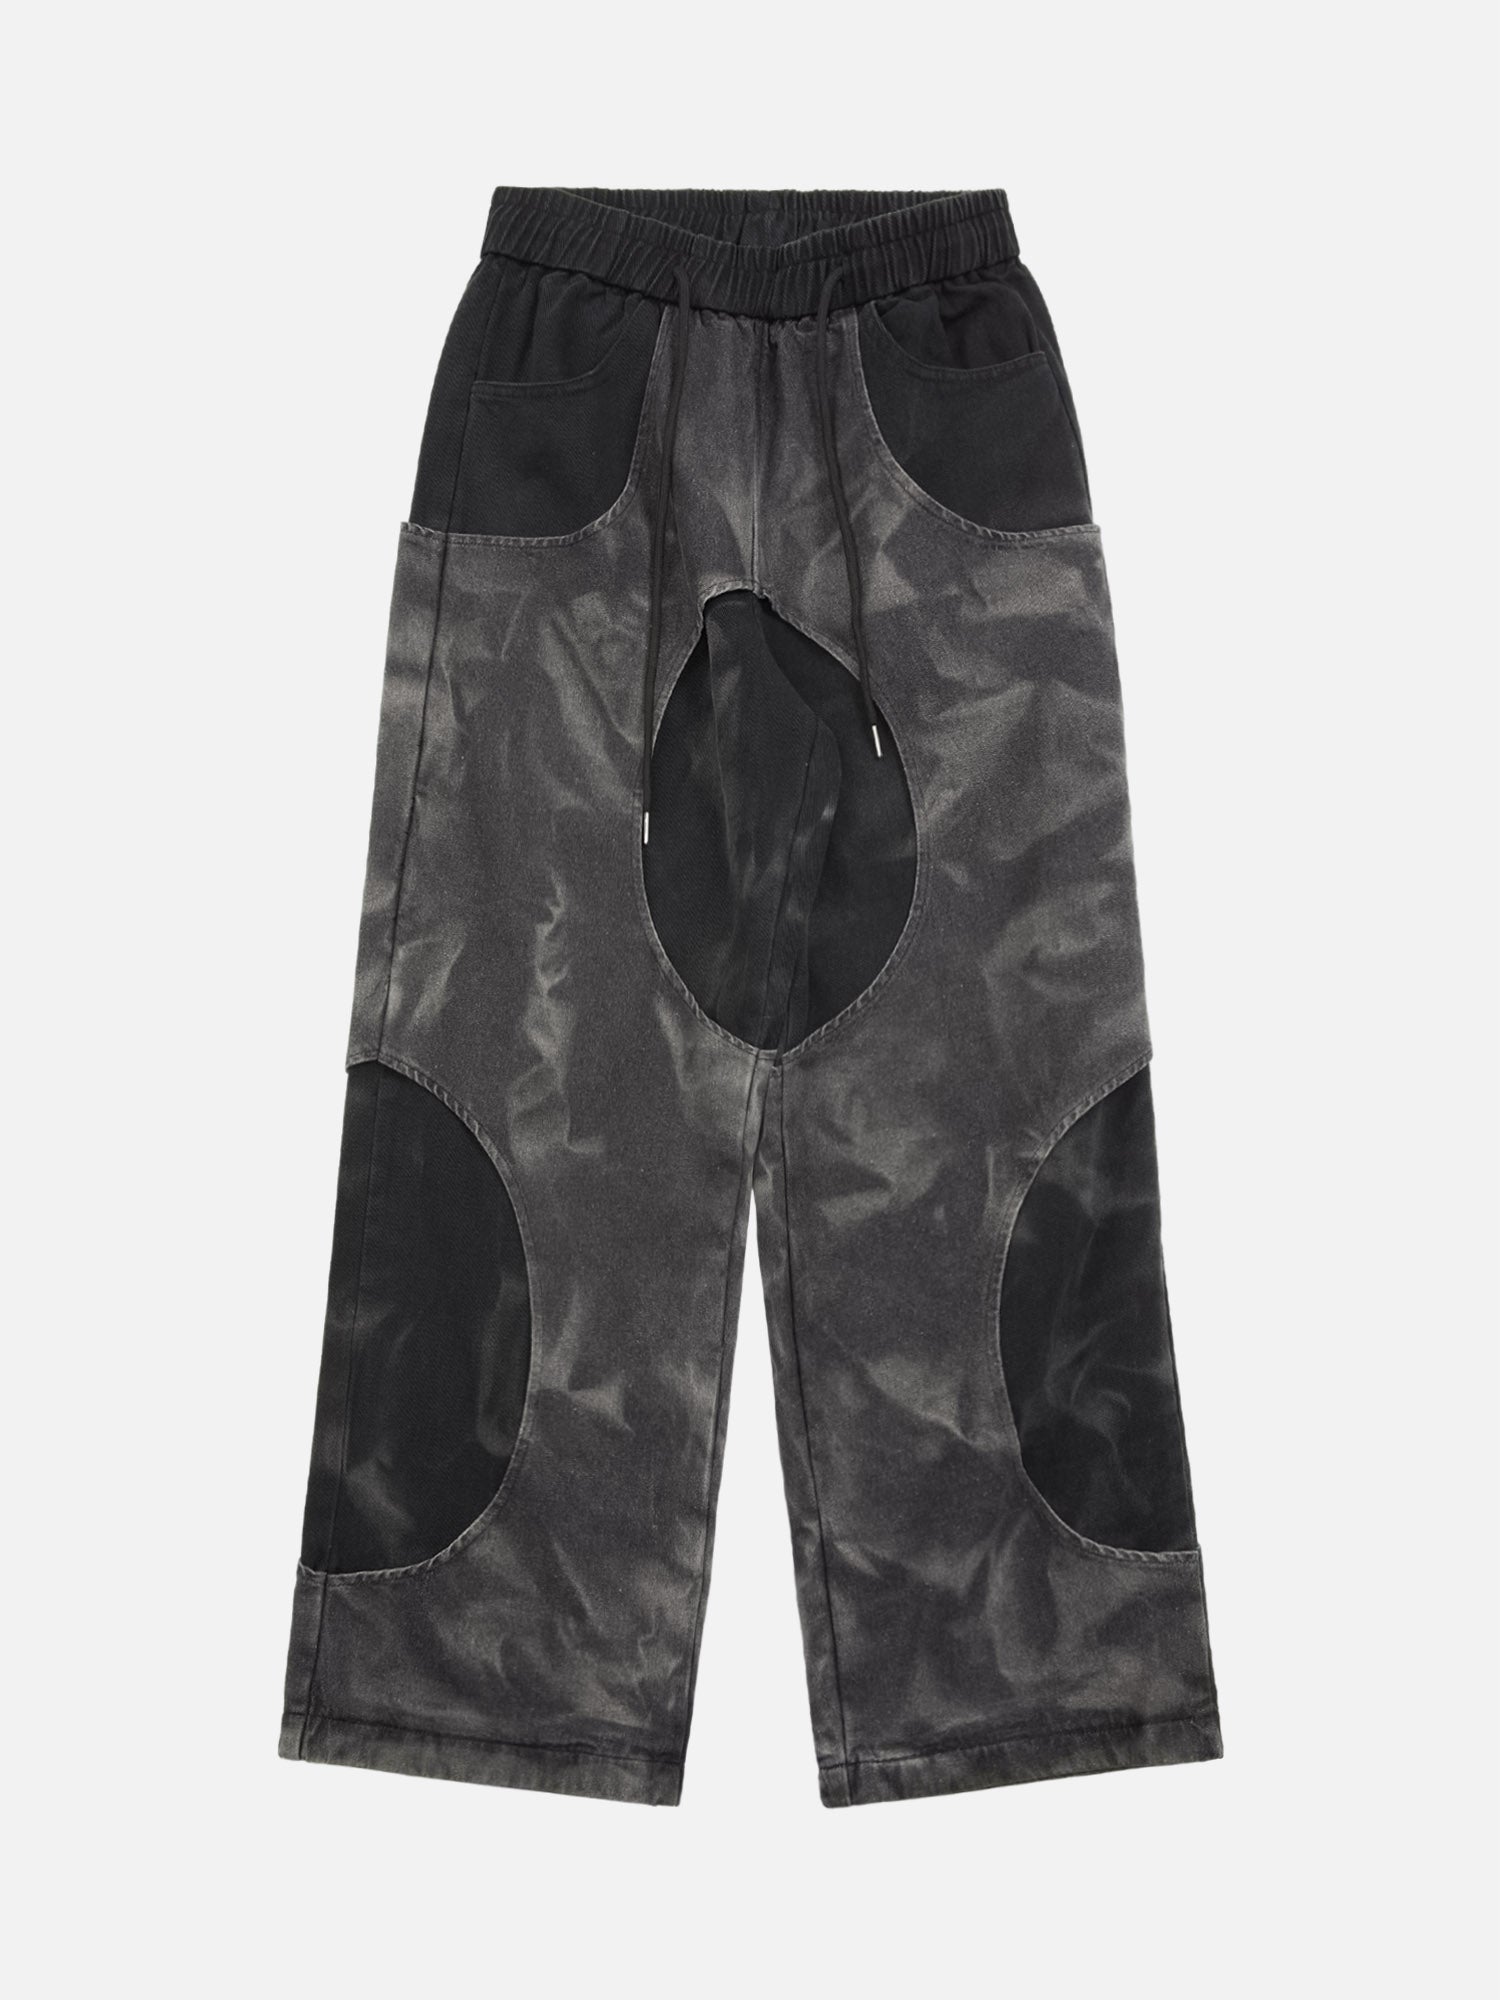 Thesupermade Distressed Tie-dye Cutout Hip-hop Sweatpants